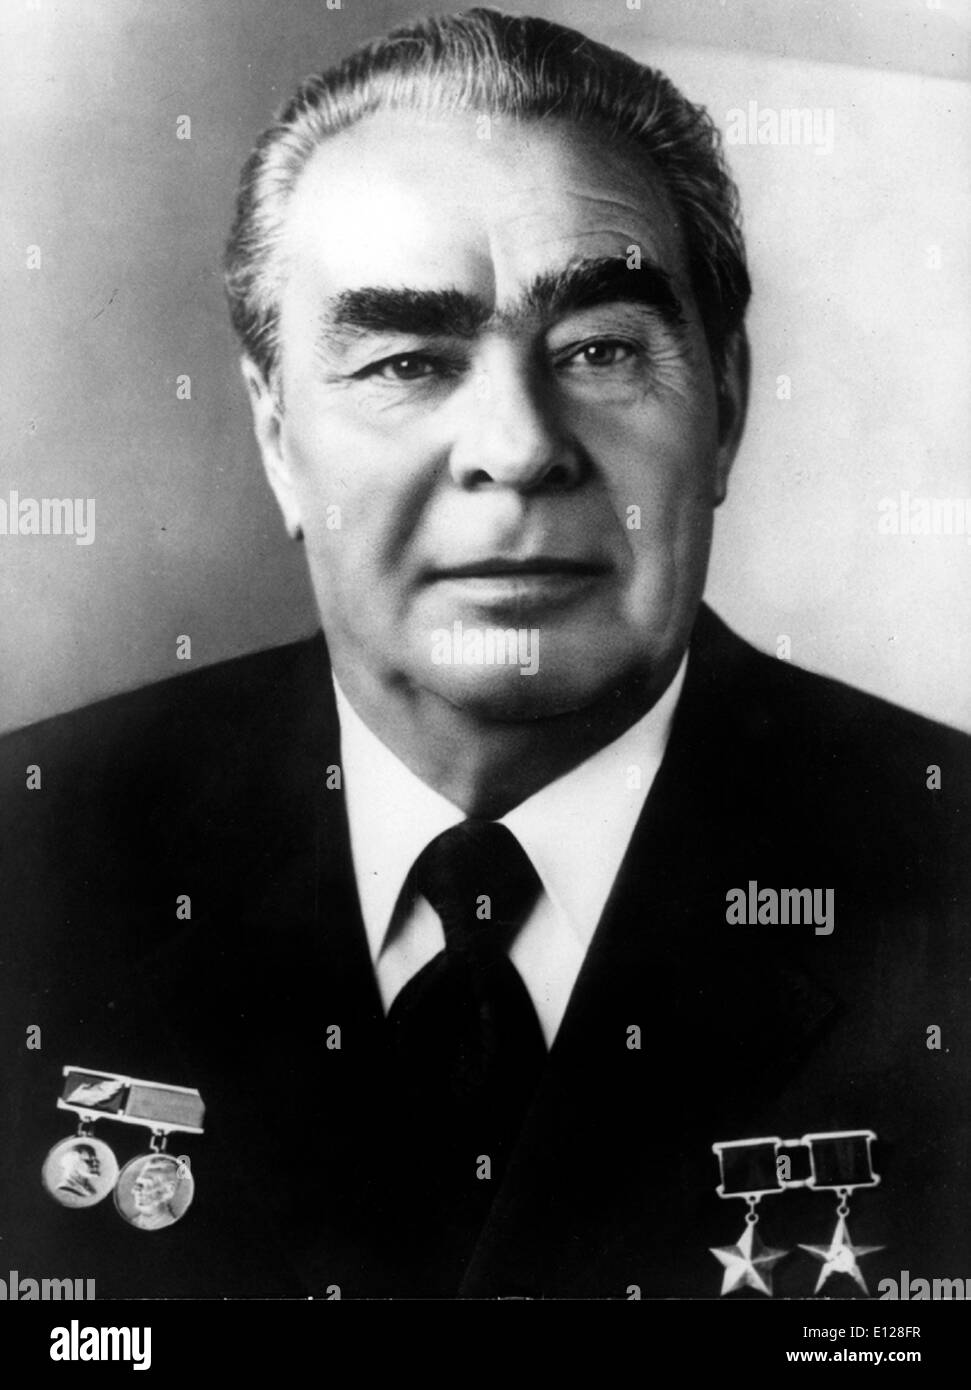 Apr 01, 2009 - London, England, United Kingdom - Leonid Brejnev. Leonid Ilyich Brezhnev [O.S. 6 December 1906] Ð 10 November 1982) was General Secretary of the Communist Party of the Soviet Union (and thus political leader of the Soviet Union) from 1964 to 1982, serving in that position longer than anyone other than J. Stalin. He was twice Chairman of the Presidium of the Supreme Soviet (head of state), from 7 May 1960 to 15 July 1964 and from 16 June 1977 to his death on 10 November 1982. (Credit Image: KEYSTONE Pictures USA/ZUMAPRESS.com) Stock Photo